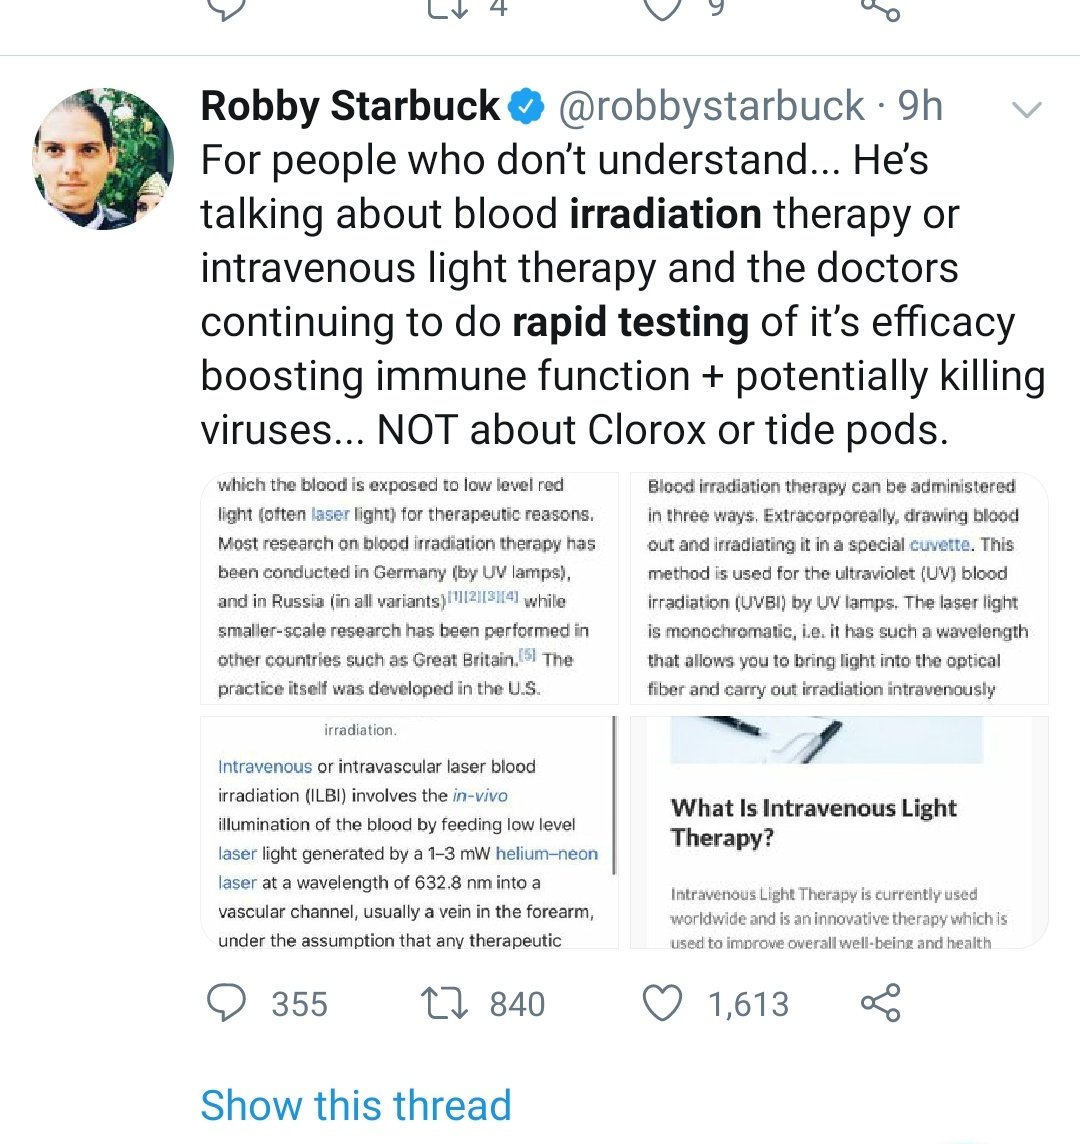 3/ and a few more. Patient zero seems to be this Robby Starbuck fella....Thanks a latte Robby